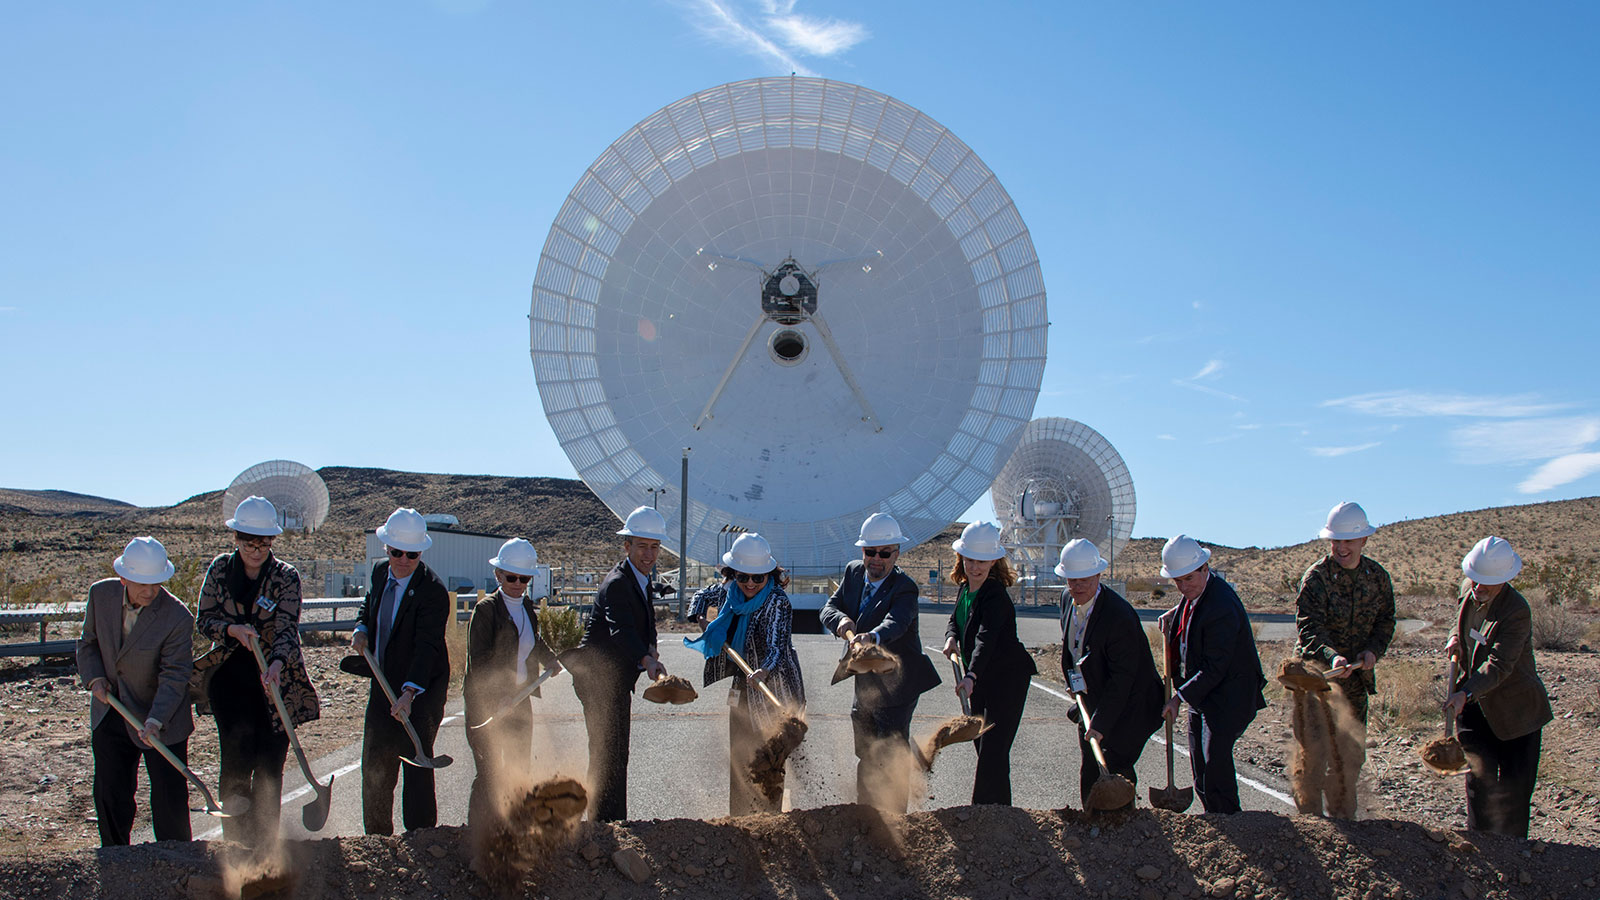 On Feb. 11, 2020, NASA, JPL, military and local officials broke ground in Goldstone, California